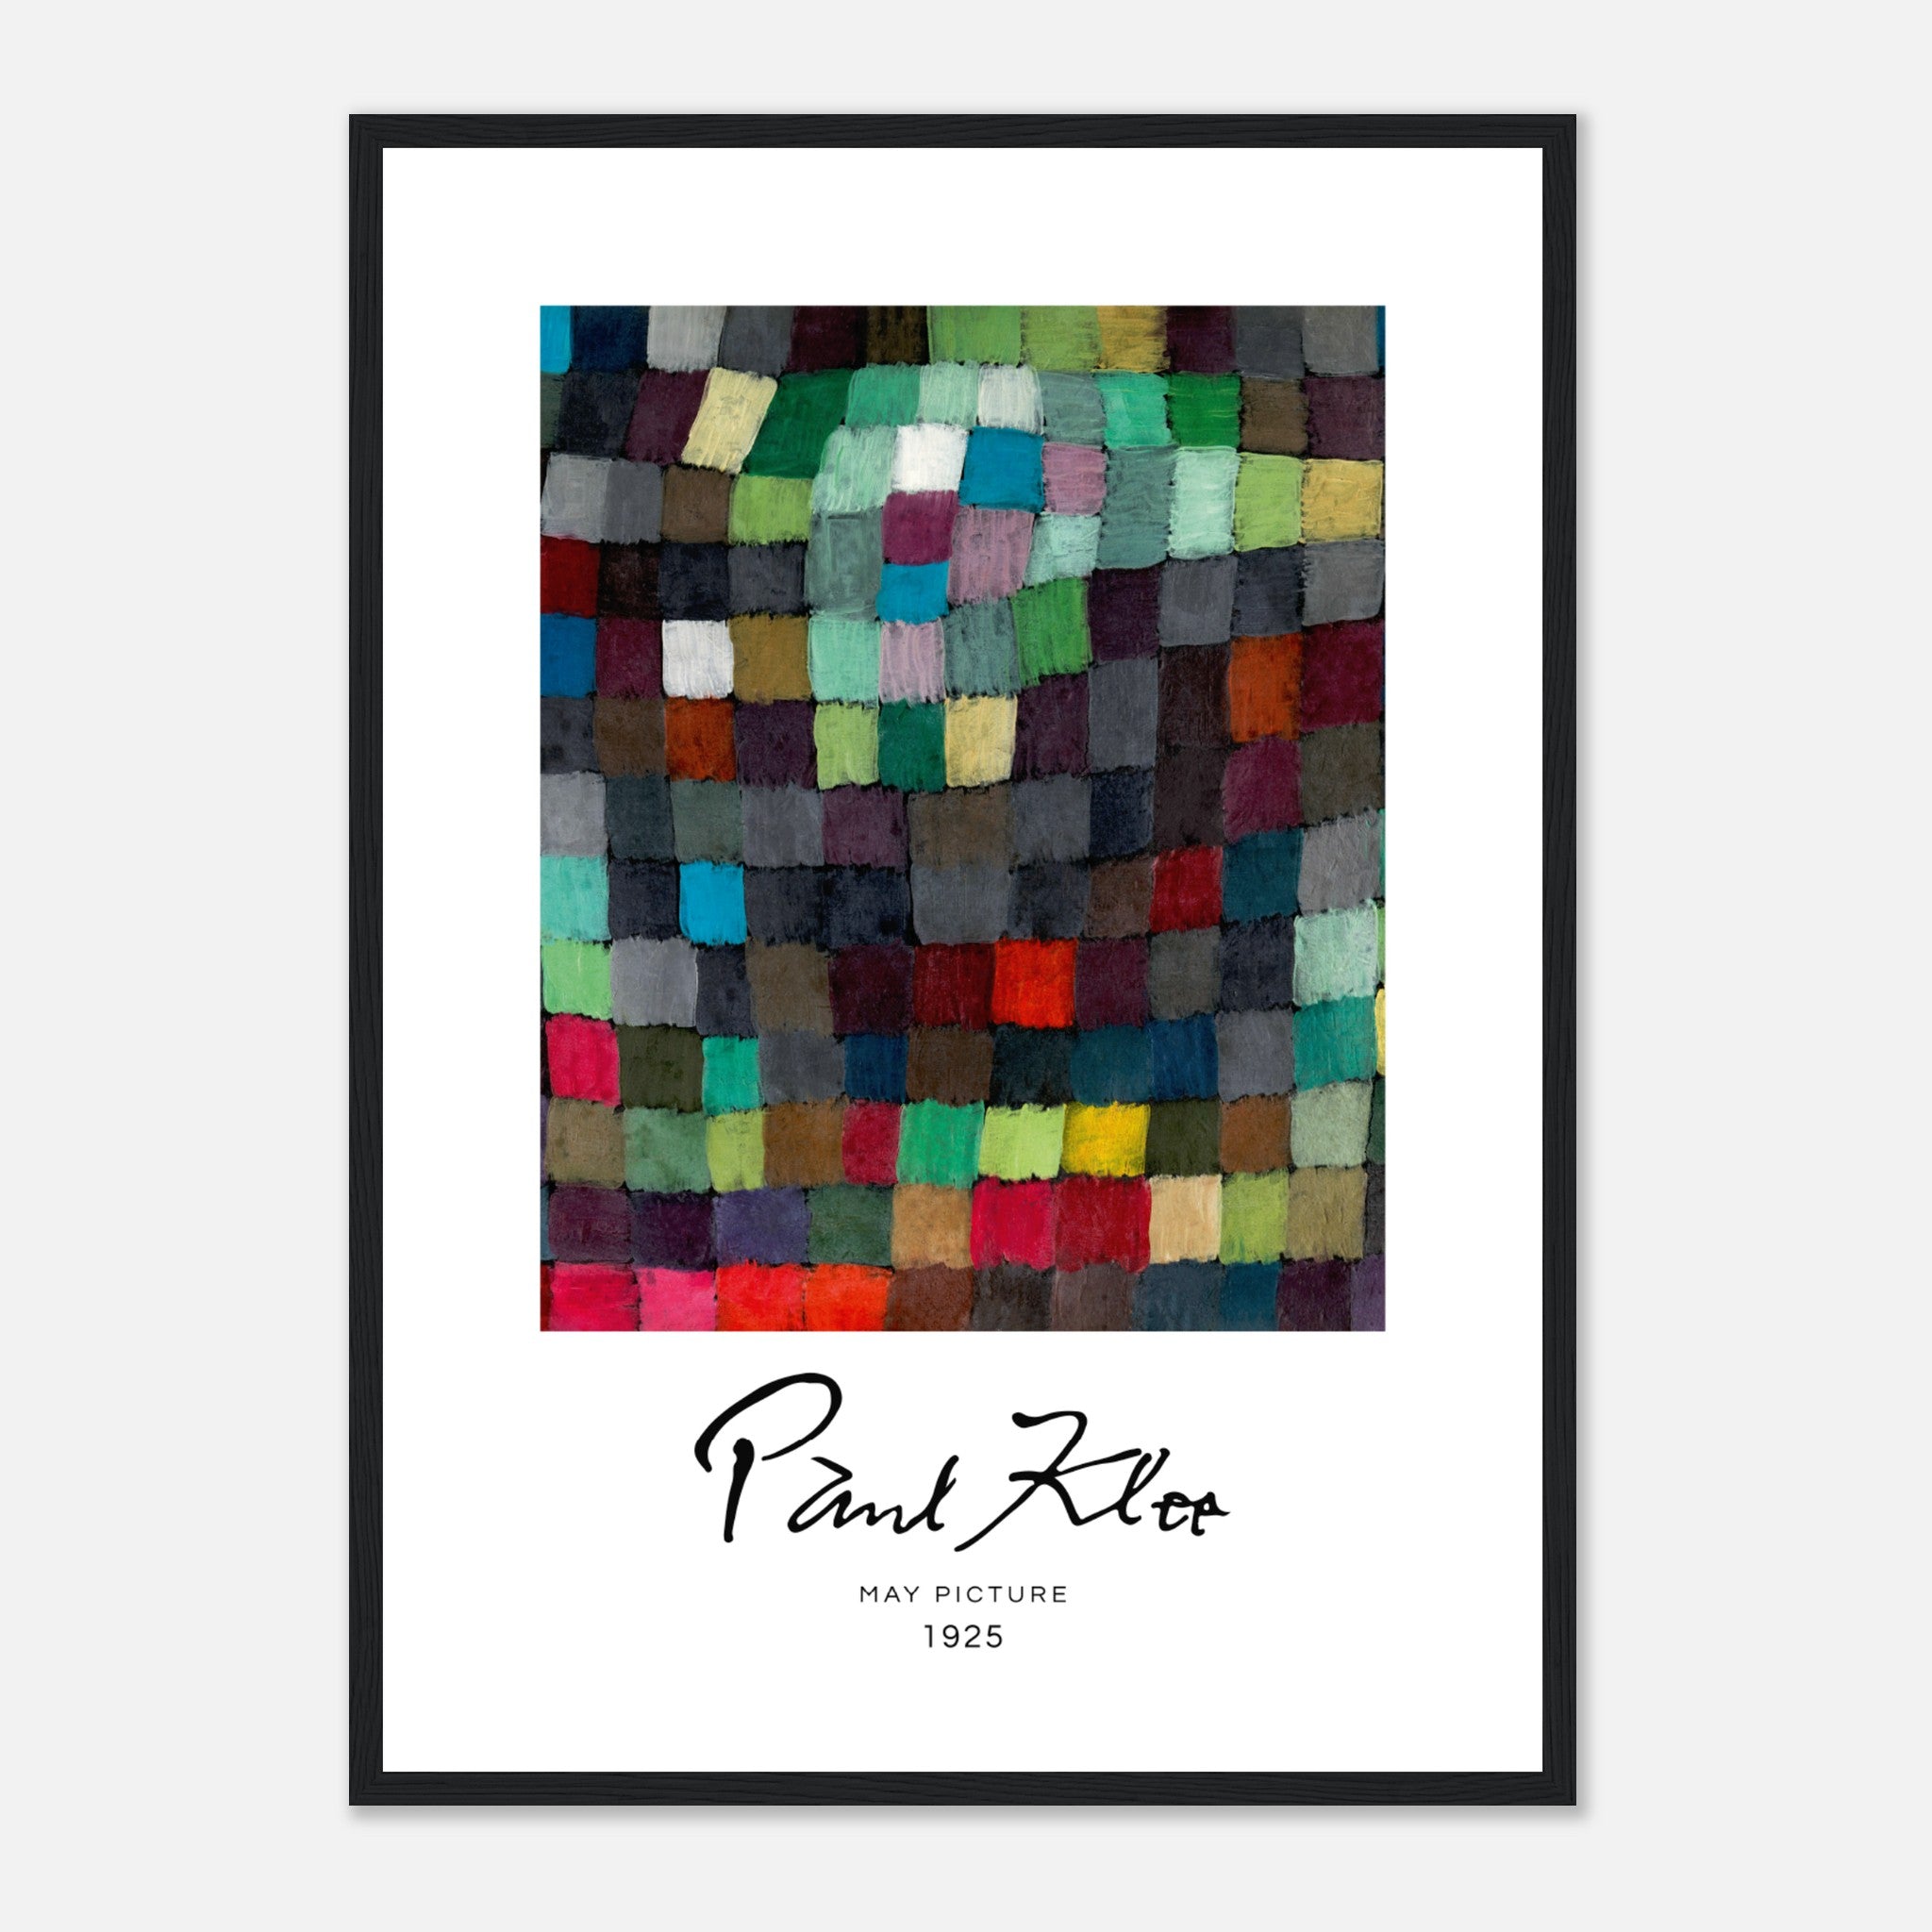 May Picture by Paul Klee Poster